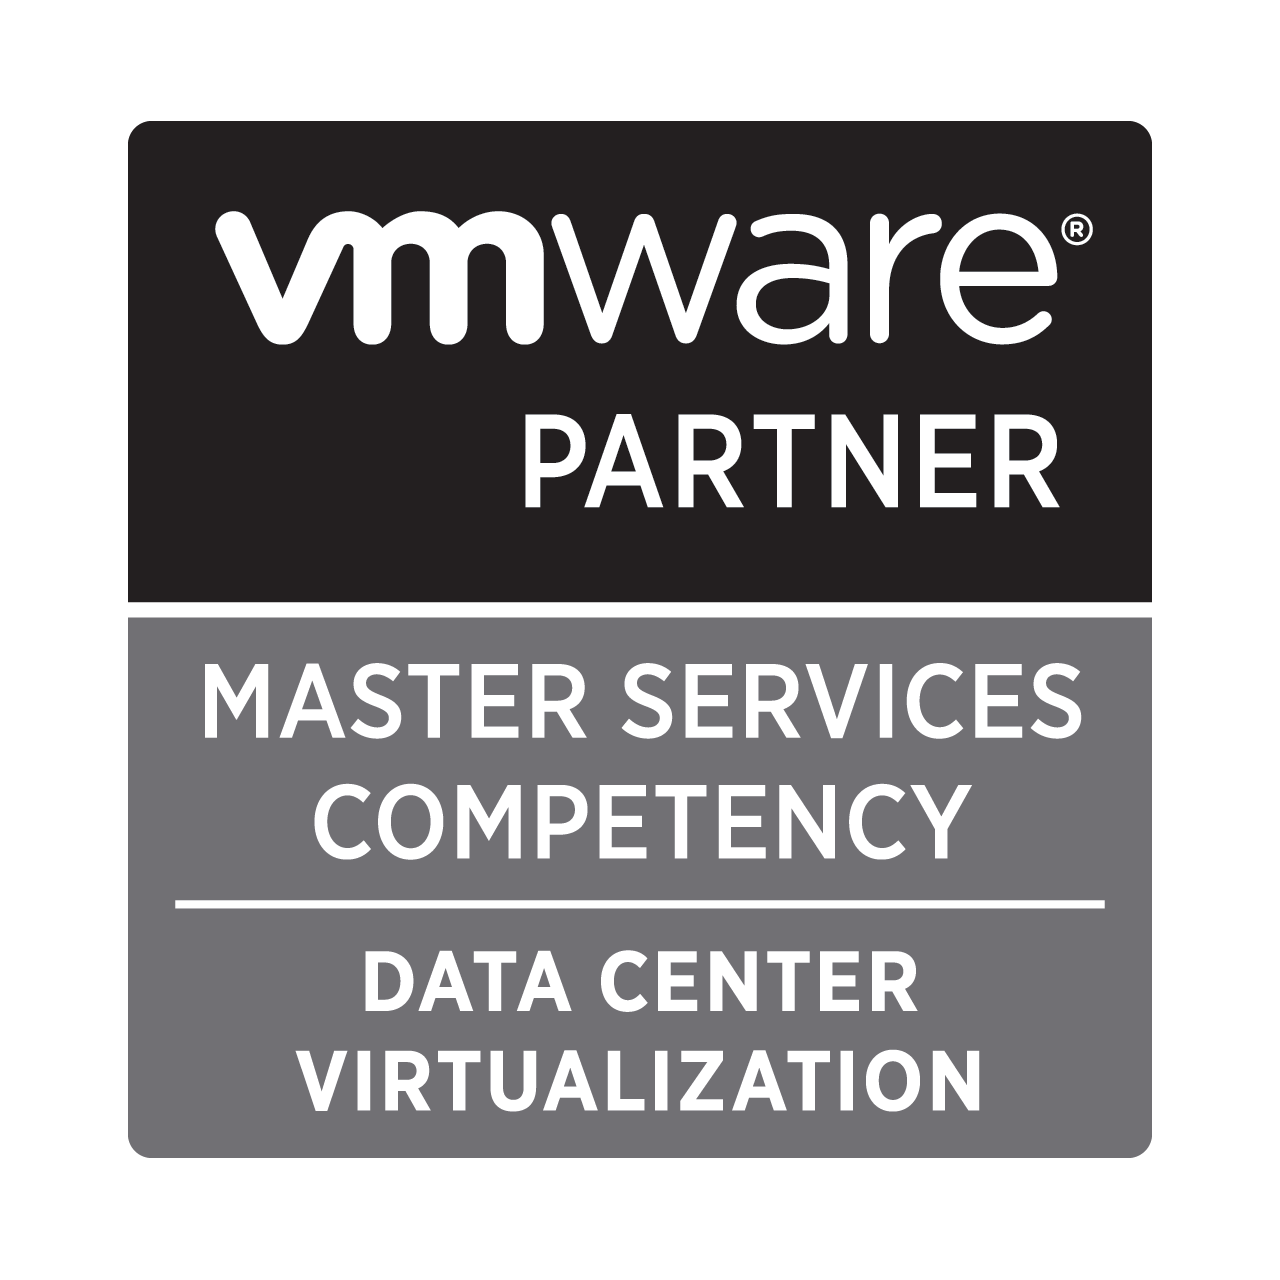 Mastersystem Achieves VMware Master Services Competency in Data Center Virtualization, First in INDONESIA